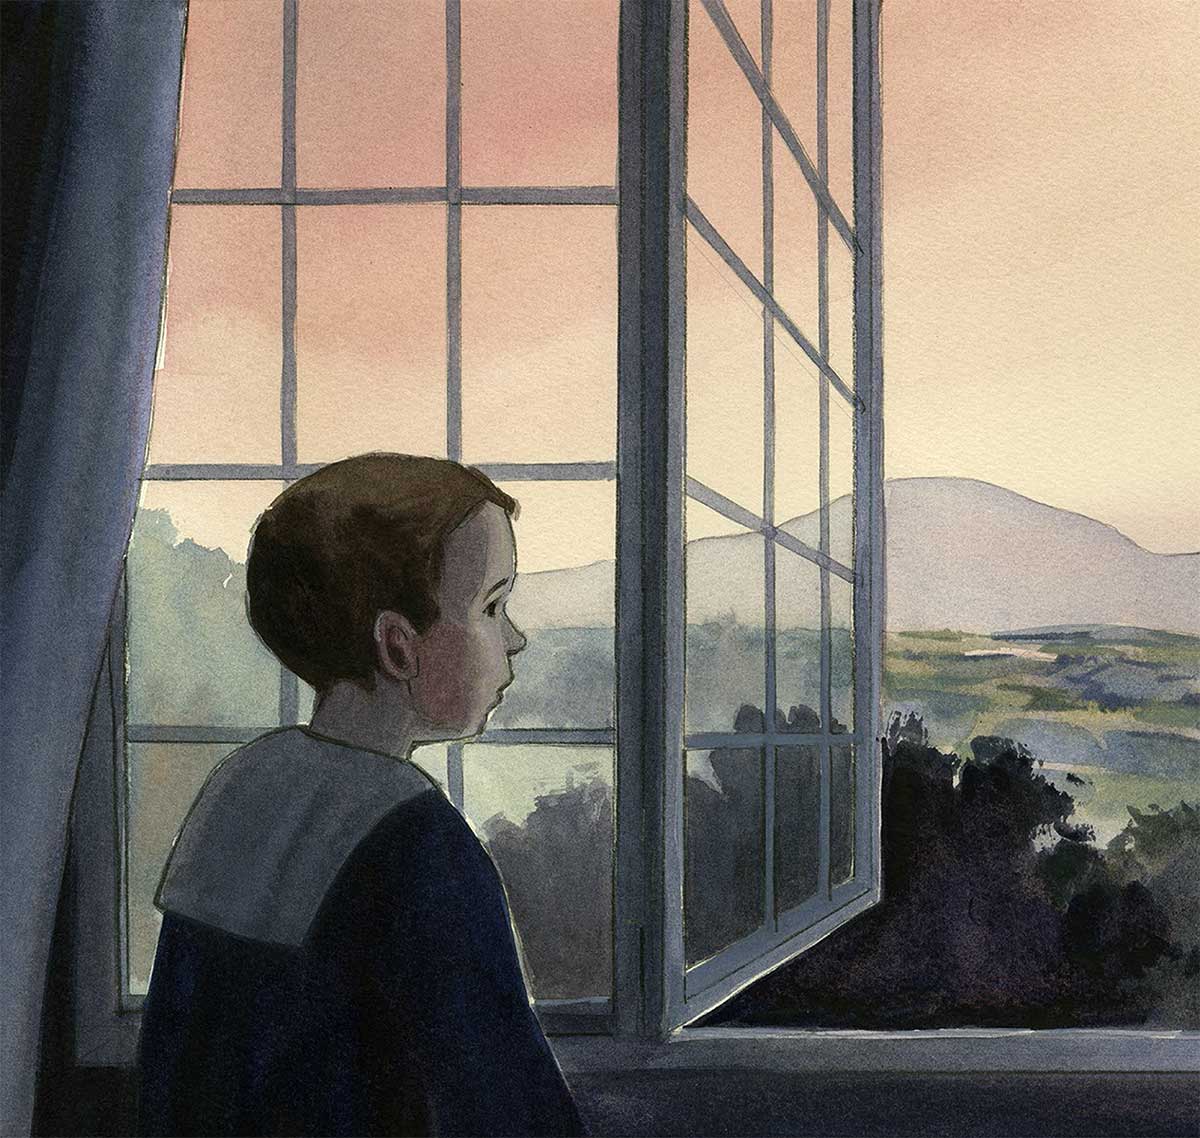 Detail from watercolor illustration in 'Finding Narnia' of young Jack (C.S. Lewis) looking out of a window toward the Irish countryside and distant mountains.